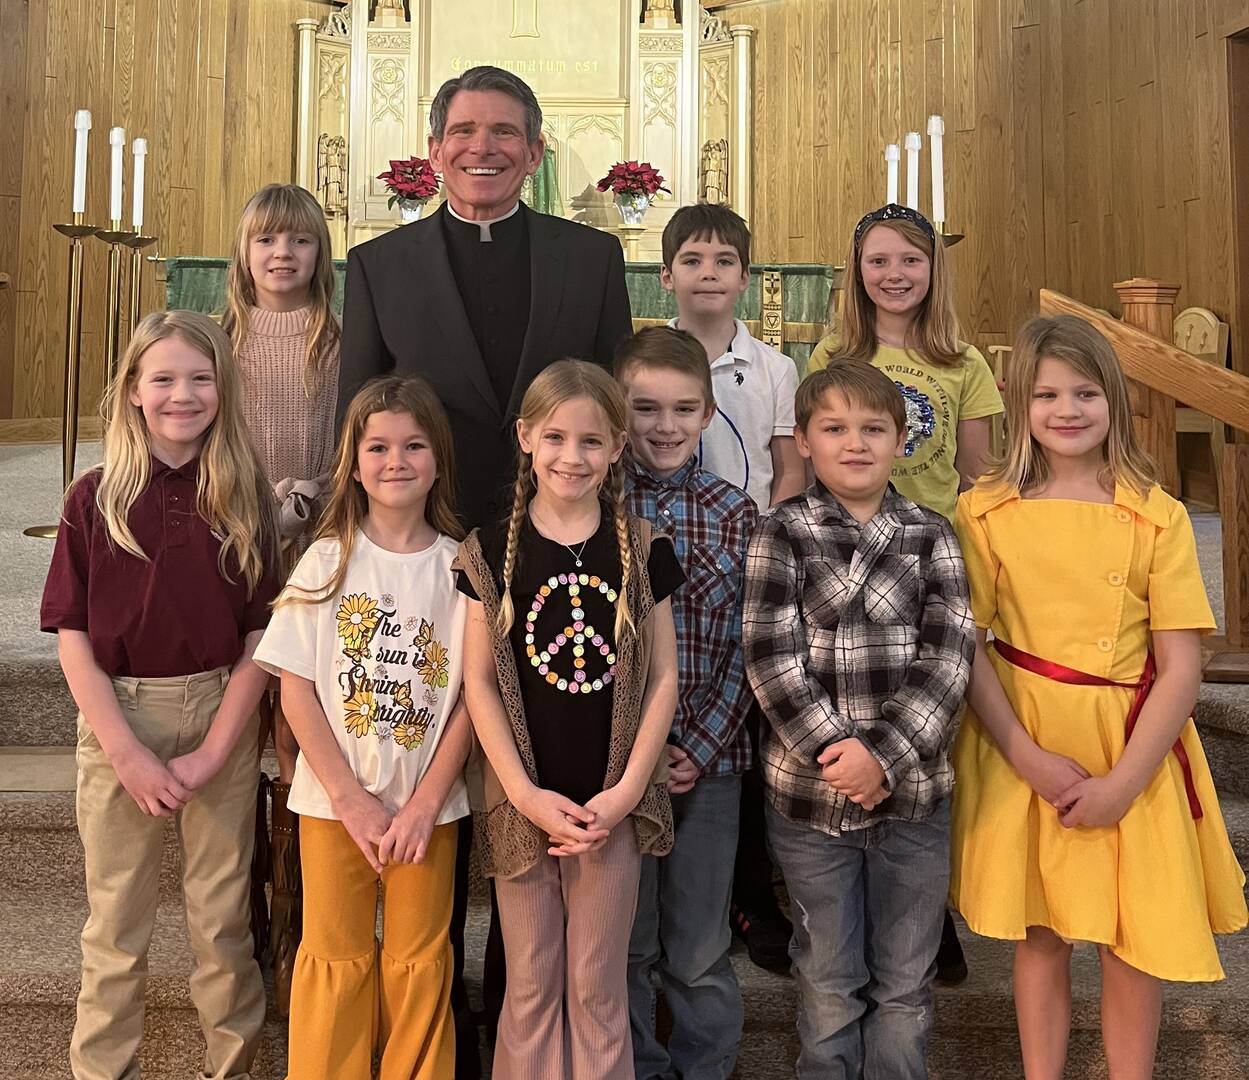 The Rev. Terrance Klein with second grade students who recently celebrated their first confession.